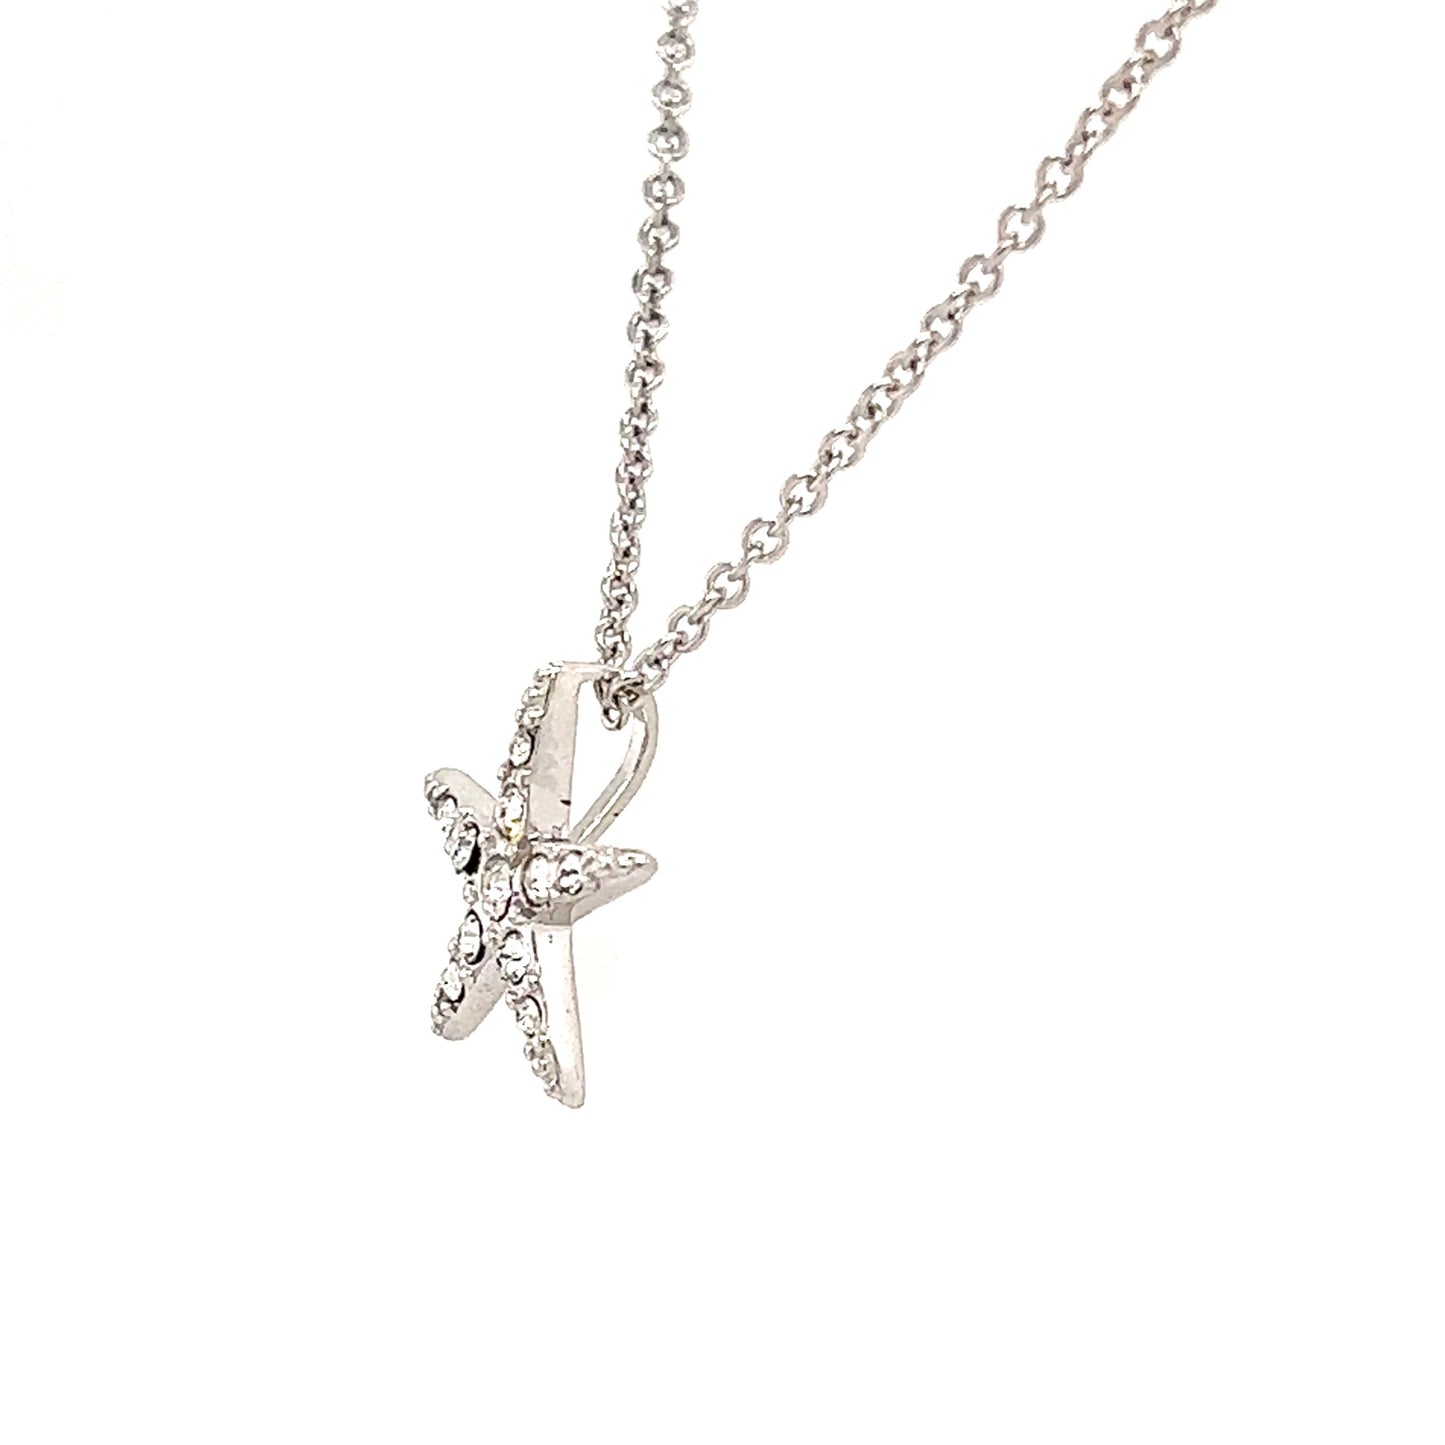 Small Starfish Necklace with White Crystals in Sterling Silver Left Side View